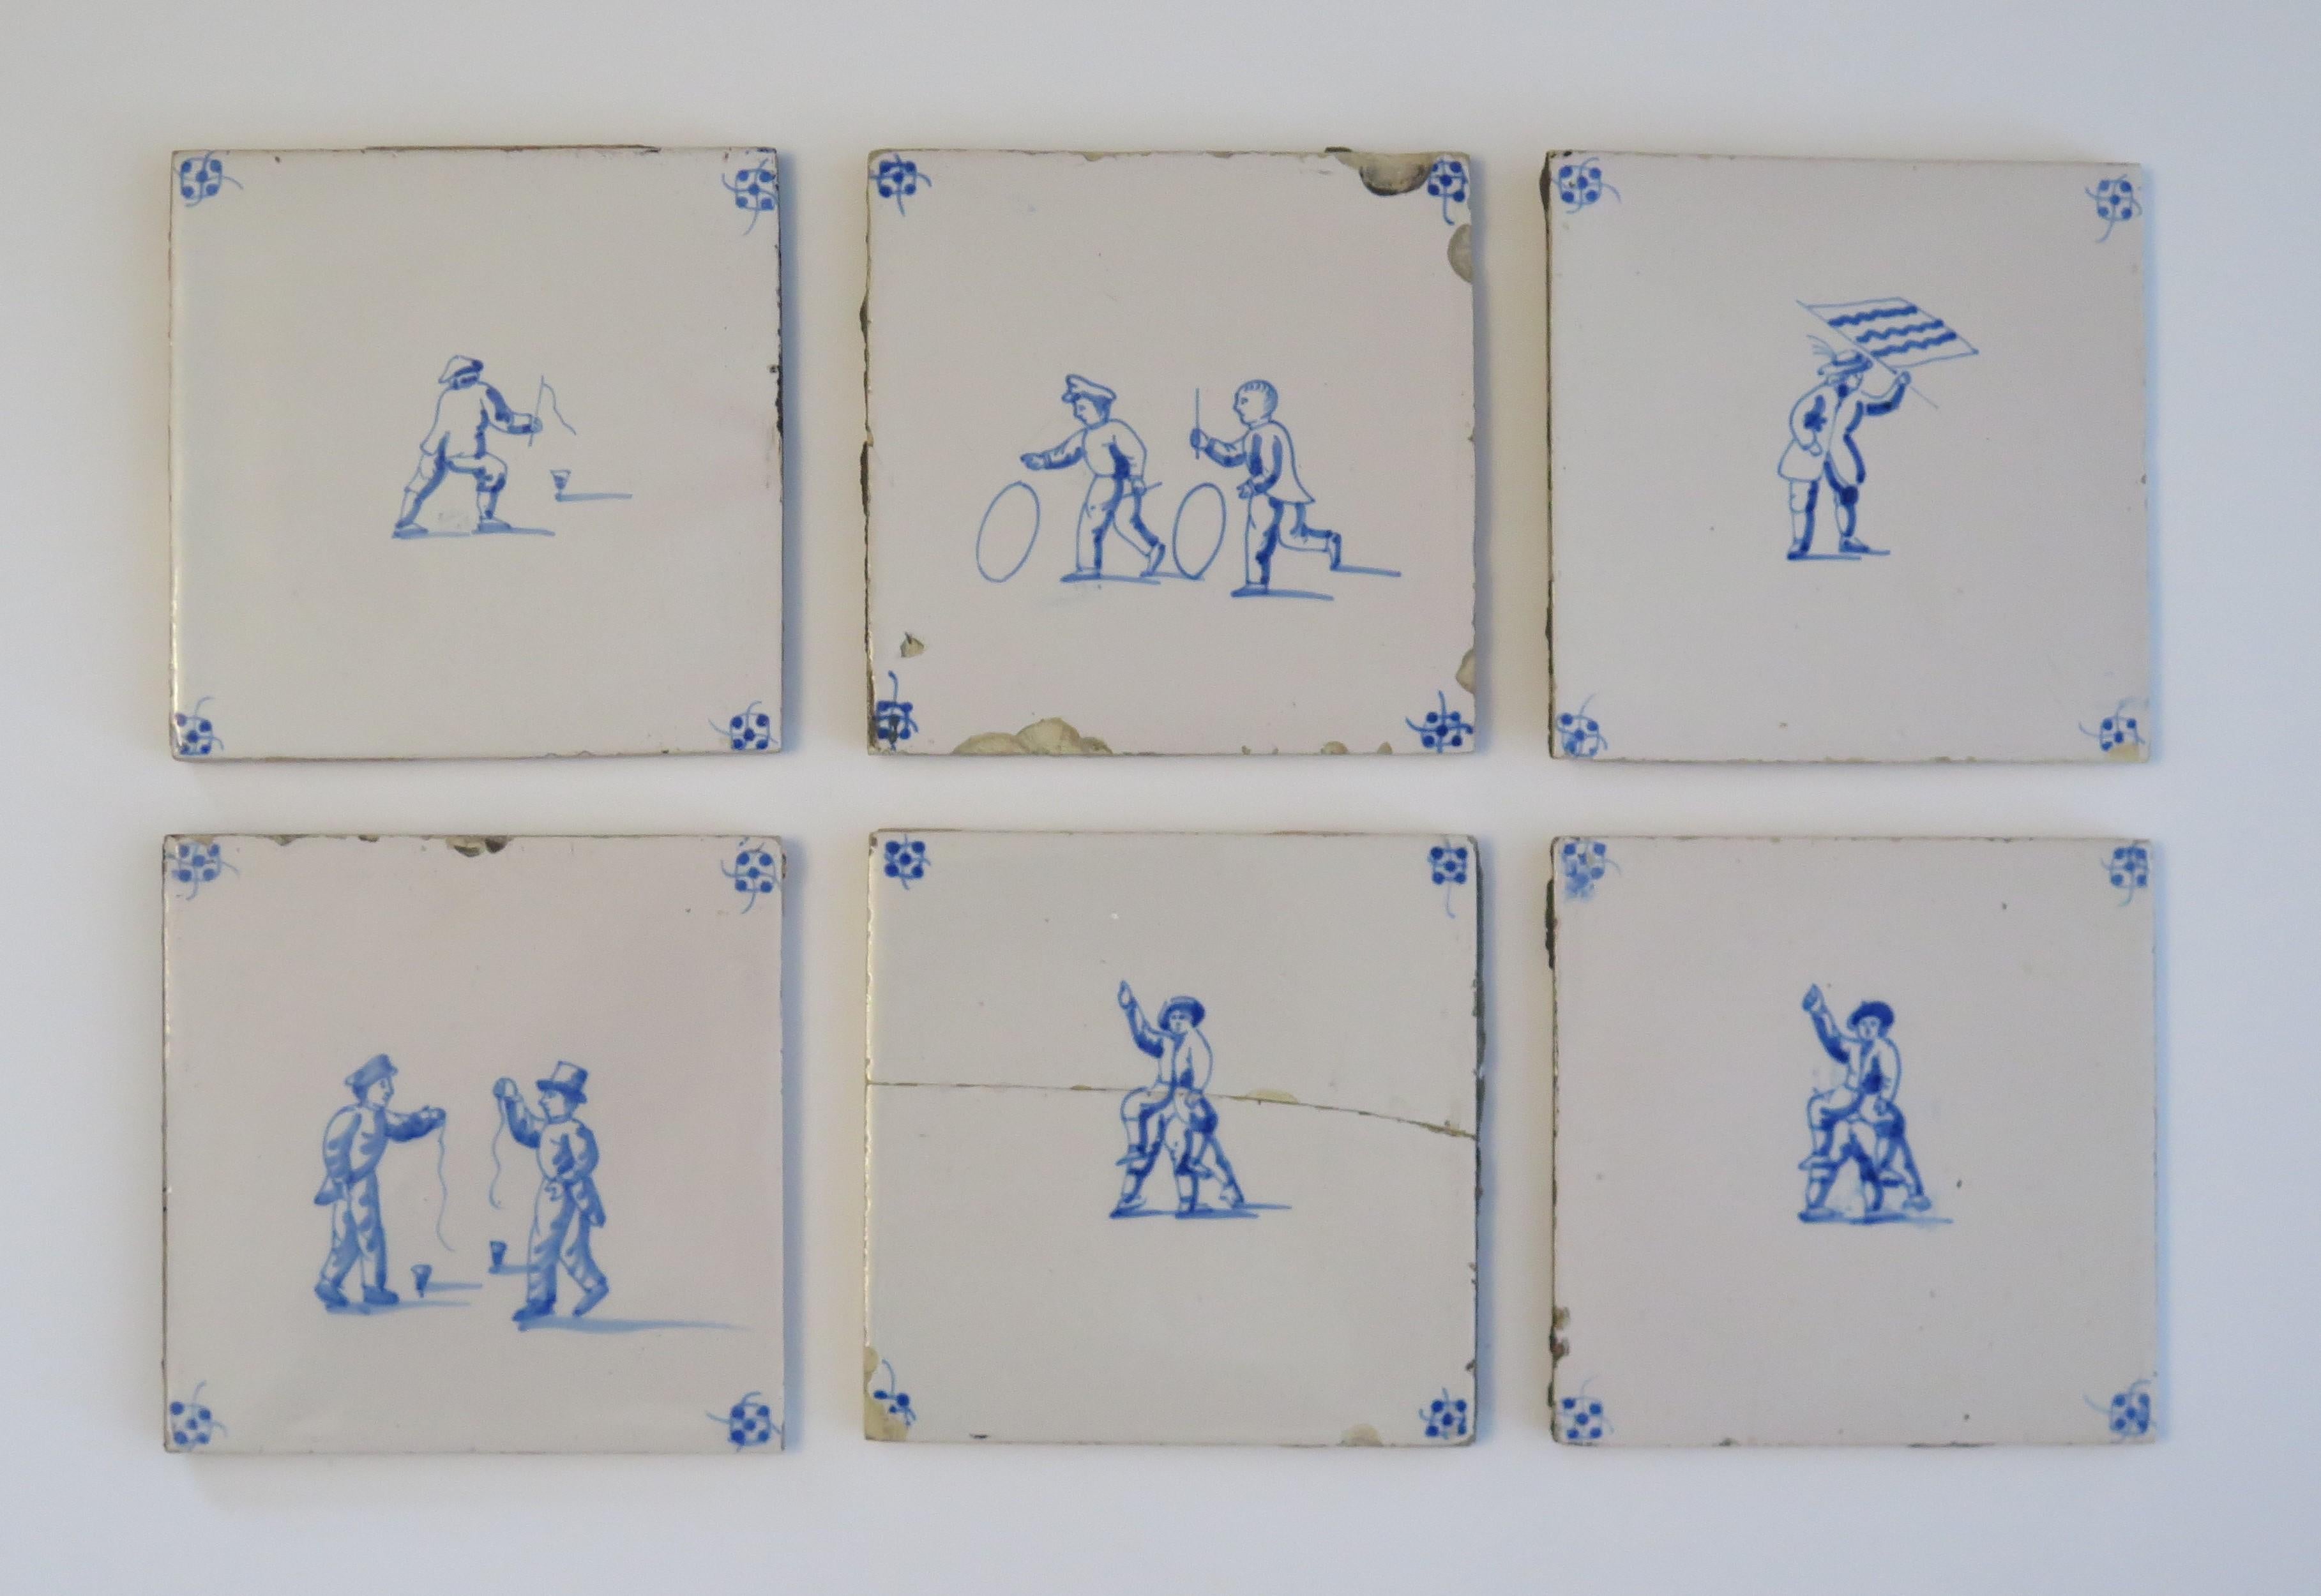 These are a set of six Delft wall tiles, all with hand painted blue and white scenes of Children playing different games, made in the Netherlands during the 19th century.

The tiles are ceramic, made of earthenware pottery and nominally about 5.2